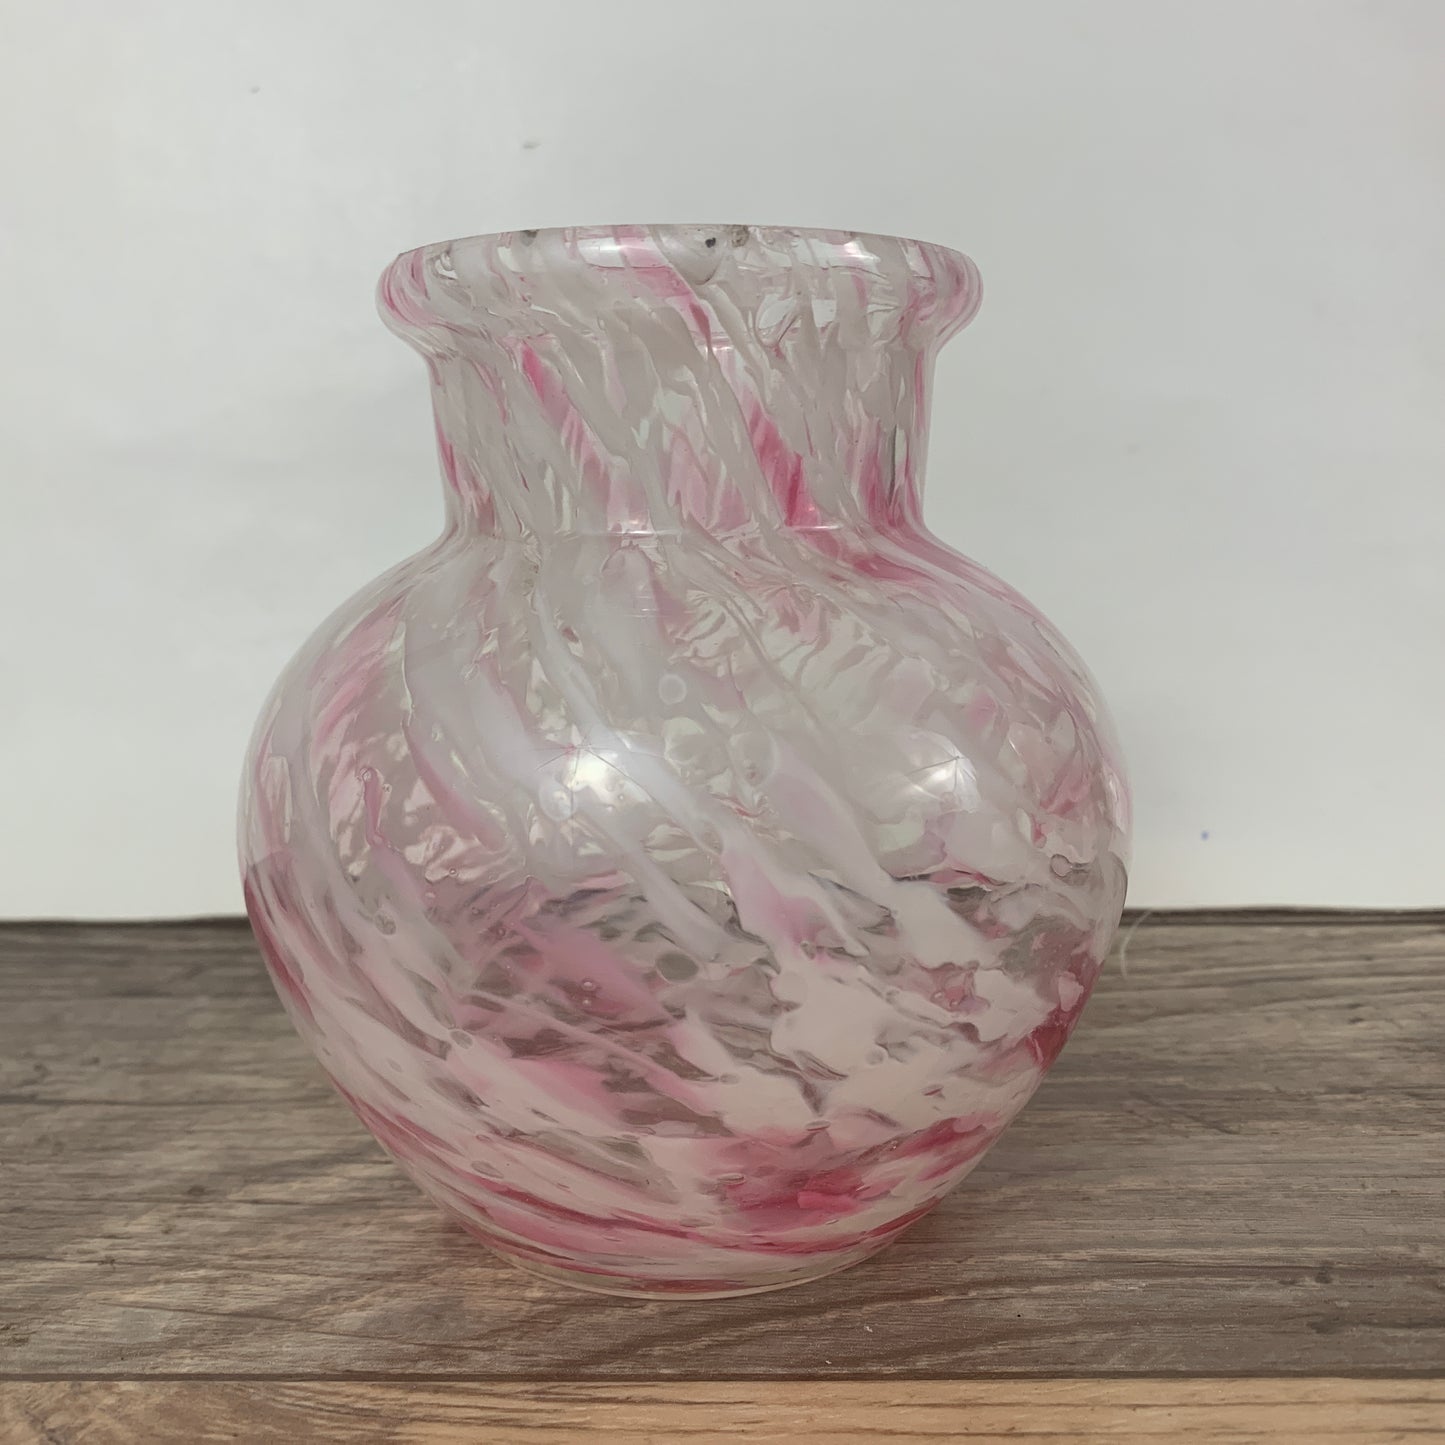 Blown Glass Vase with Red and White Swirl Pattern